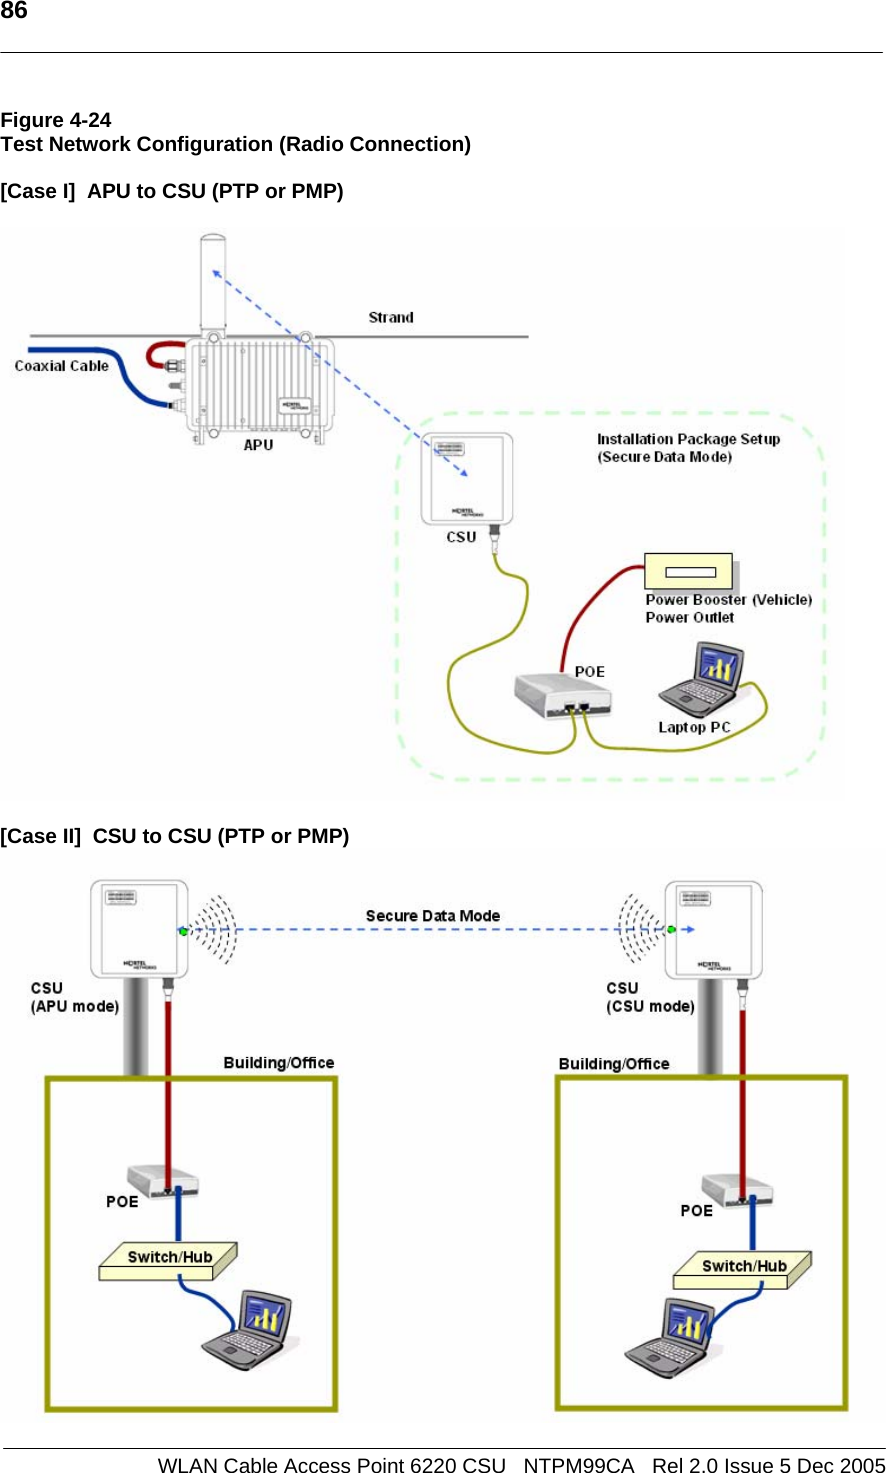   86  WLAN Cable Access Point 6220 CSU   NTPM99CA   Rel 2.0 Issue 5 Dec 2005 Figure 4-24 Test Network Configuration (Radio Connection)  [Case I]  APU to CSU (PTP or PMP)    [Case II]  CSU to CSU (PTP or PMP)  